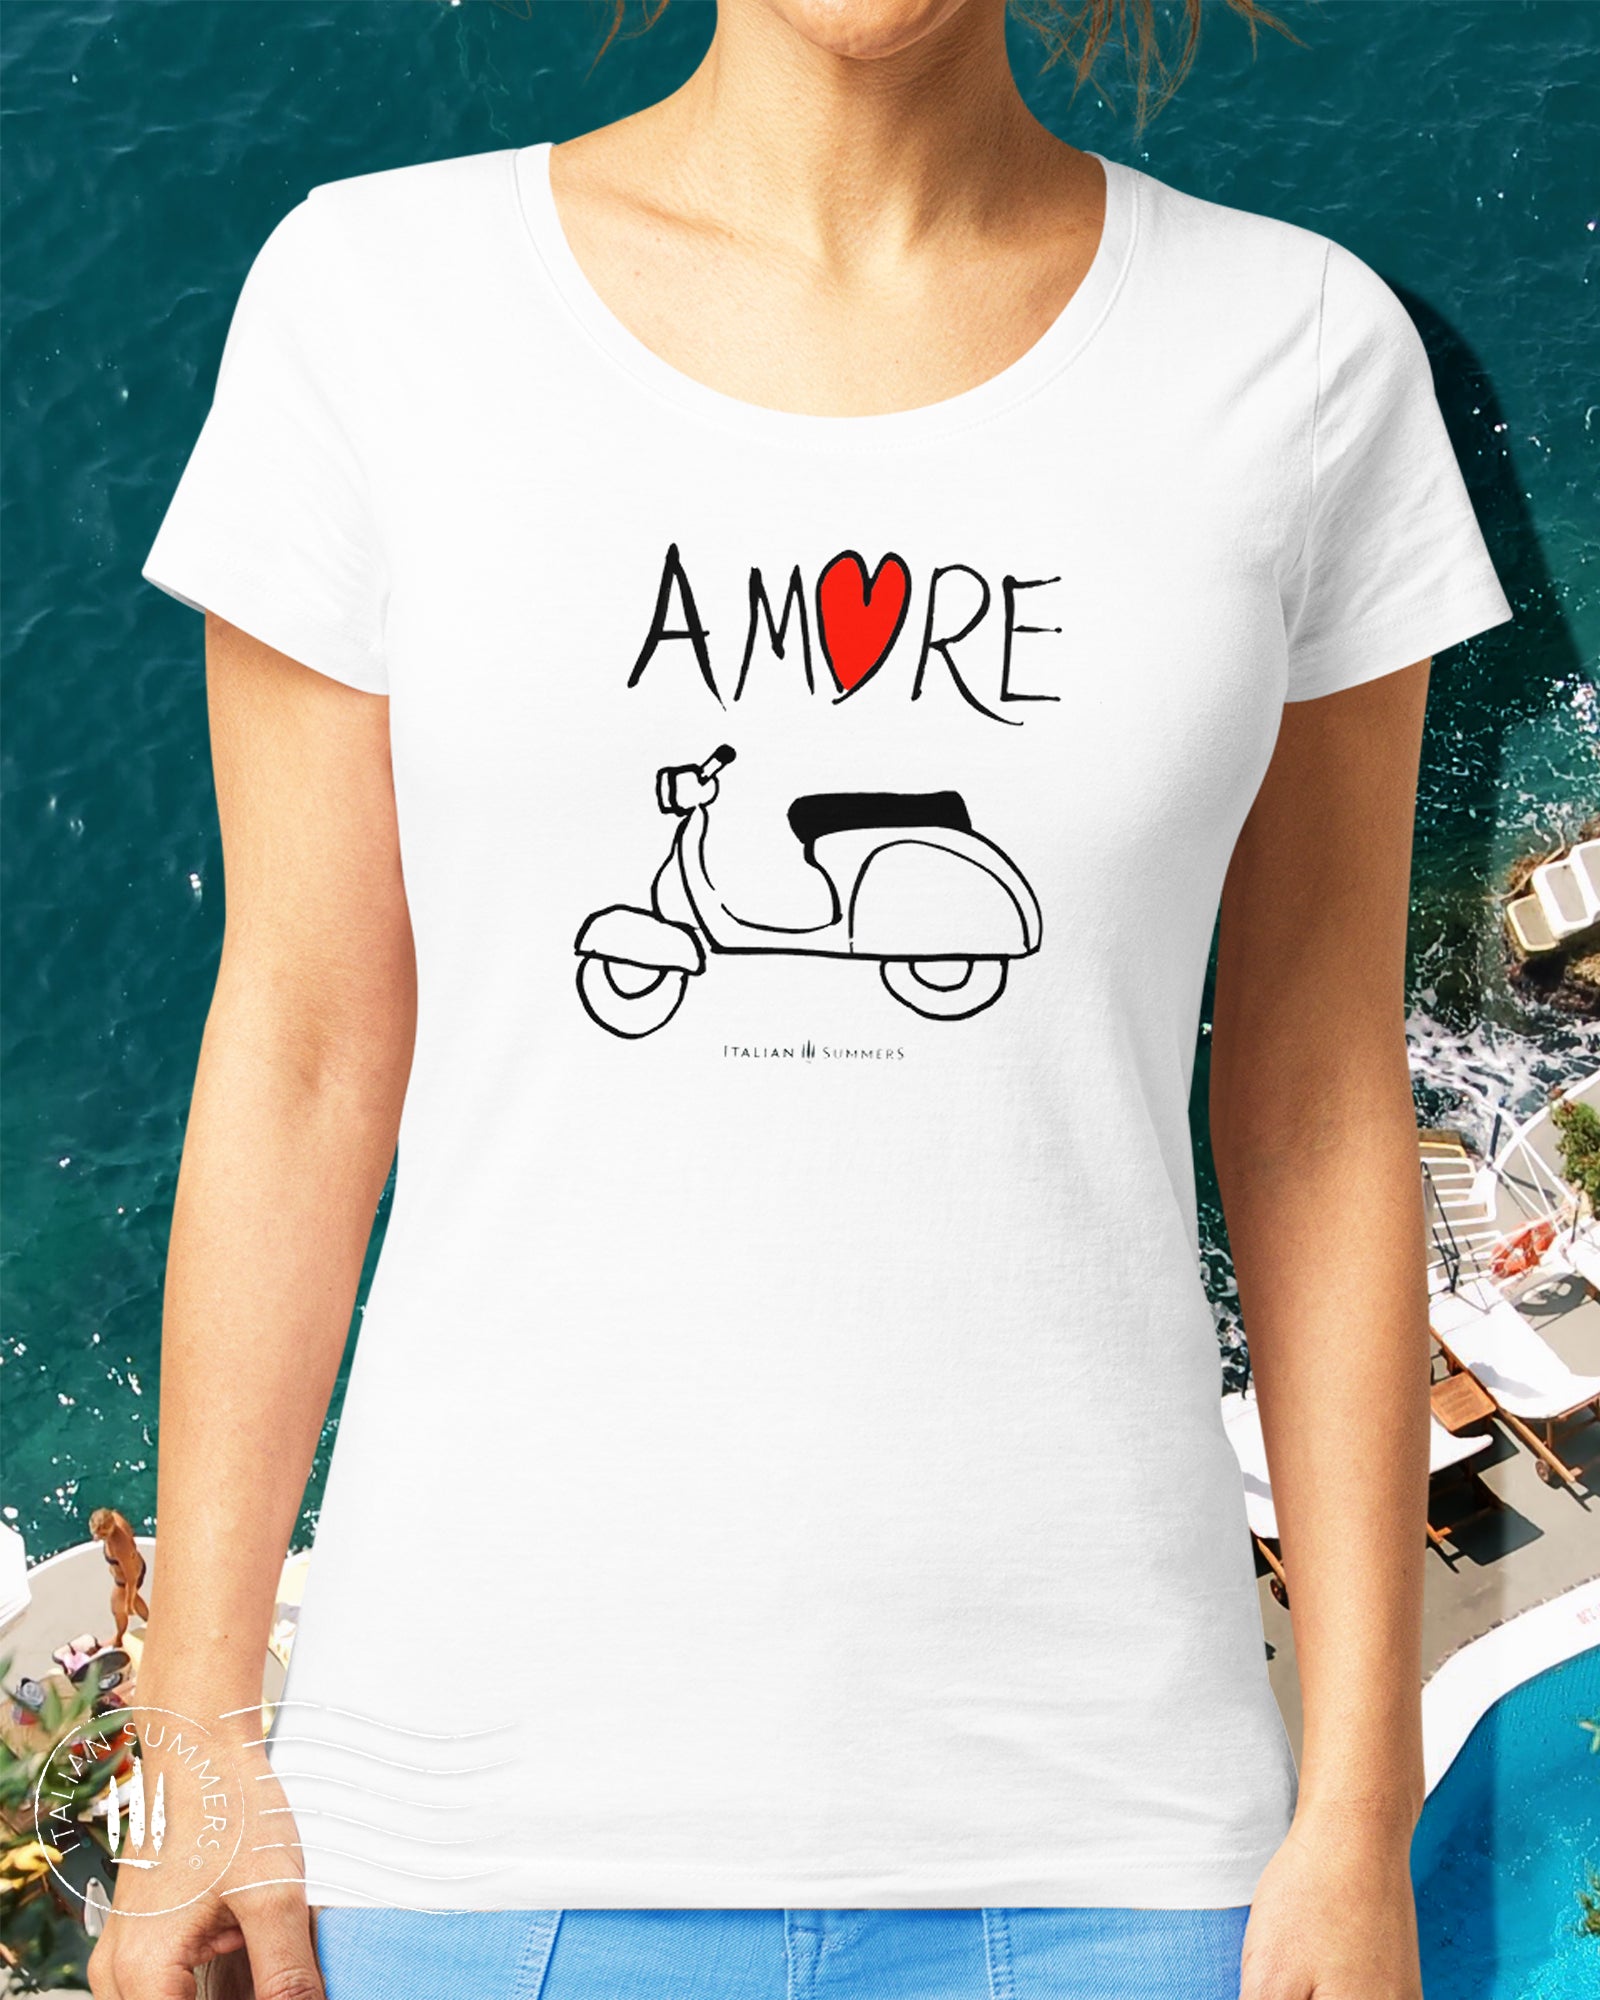 Italy inspired  white T Shirt  with a print of  hand-painted artwork we produced for a ceramic plate.  The  the word 'Amore'  with a vintage Vespa scooter  underneath. For all nostalgic Italy lovers, sure to bring a smile and a conversation in like-minded people! Made by Italian Summers